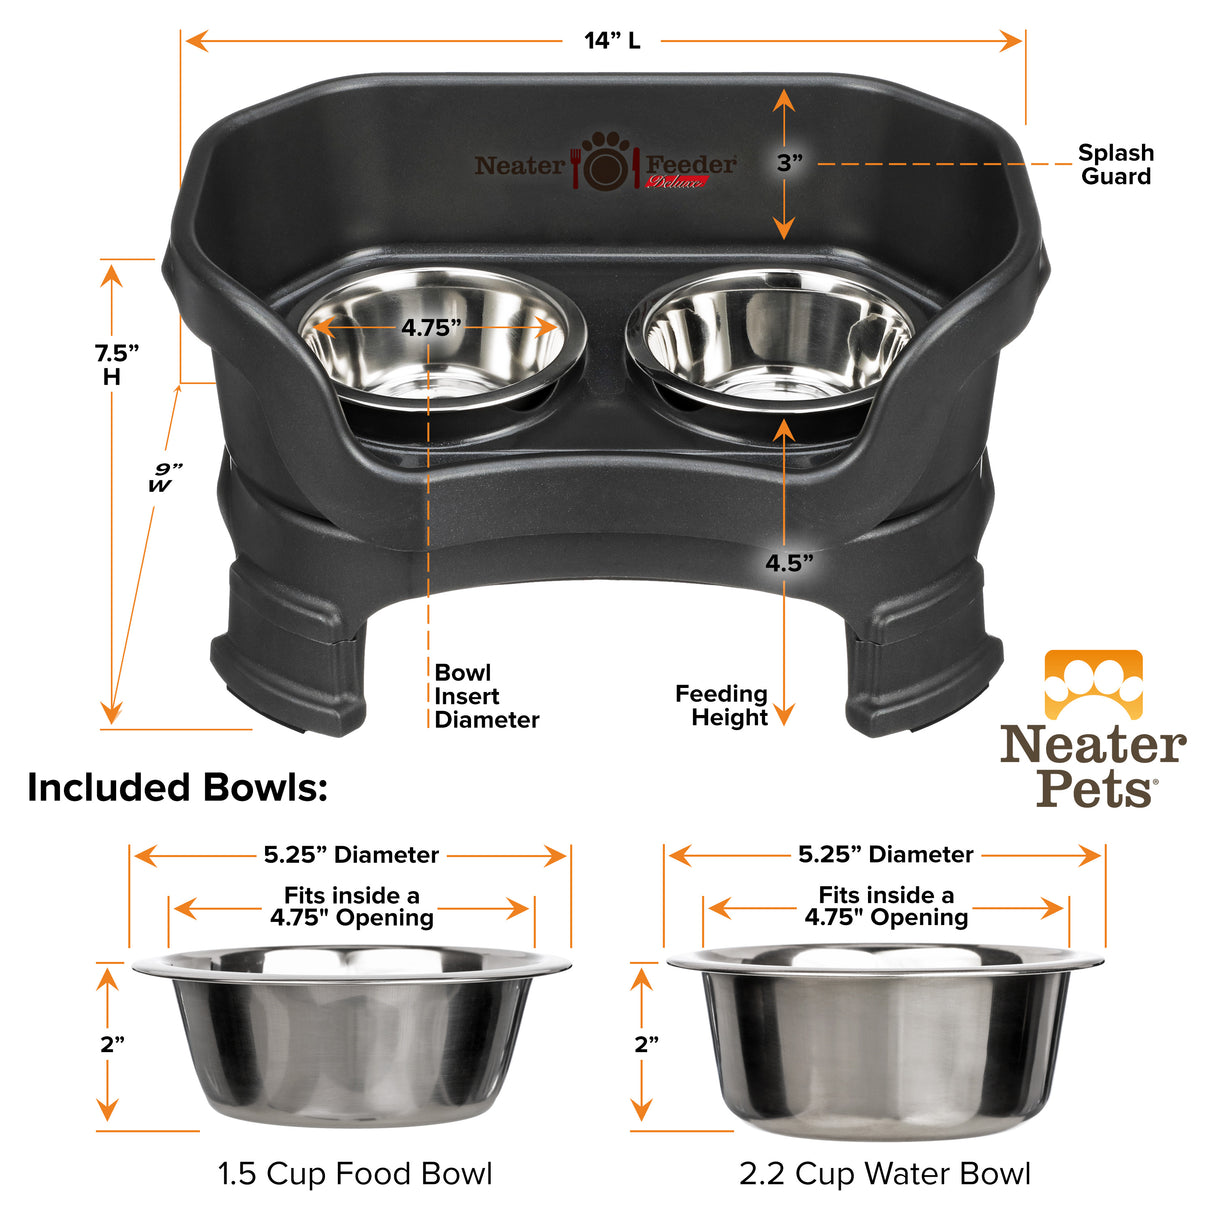 Deluxe Midnight Black Small Dog Neater Feeder with leg extensions and Bowl dimensions